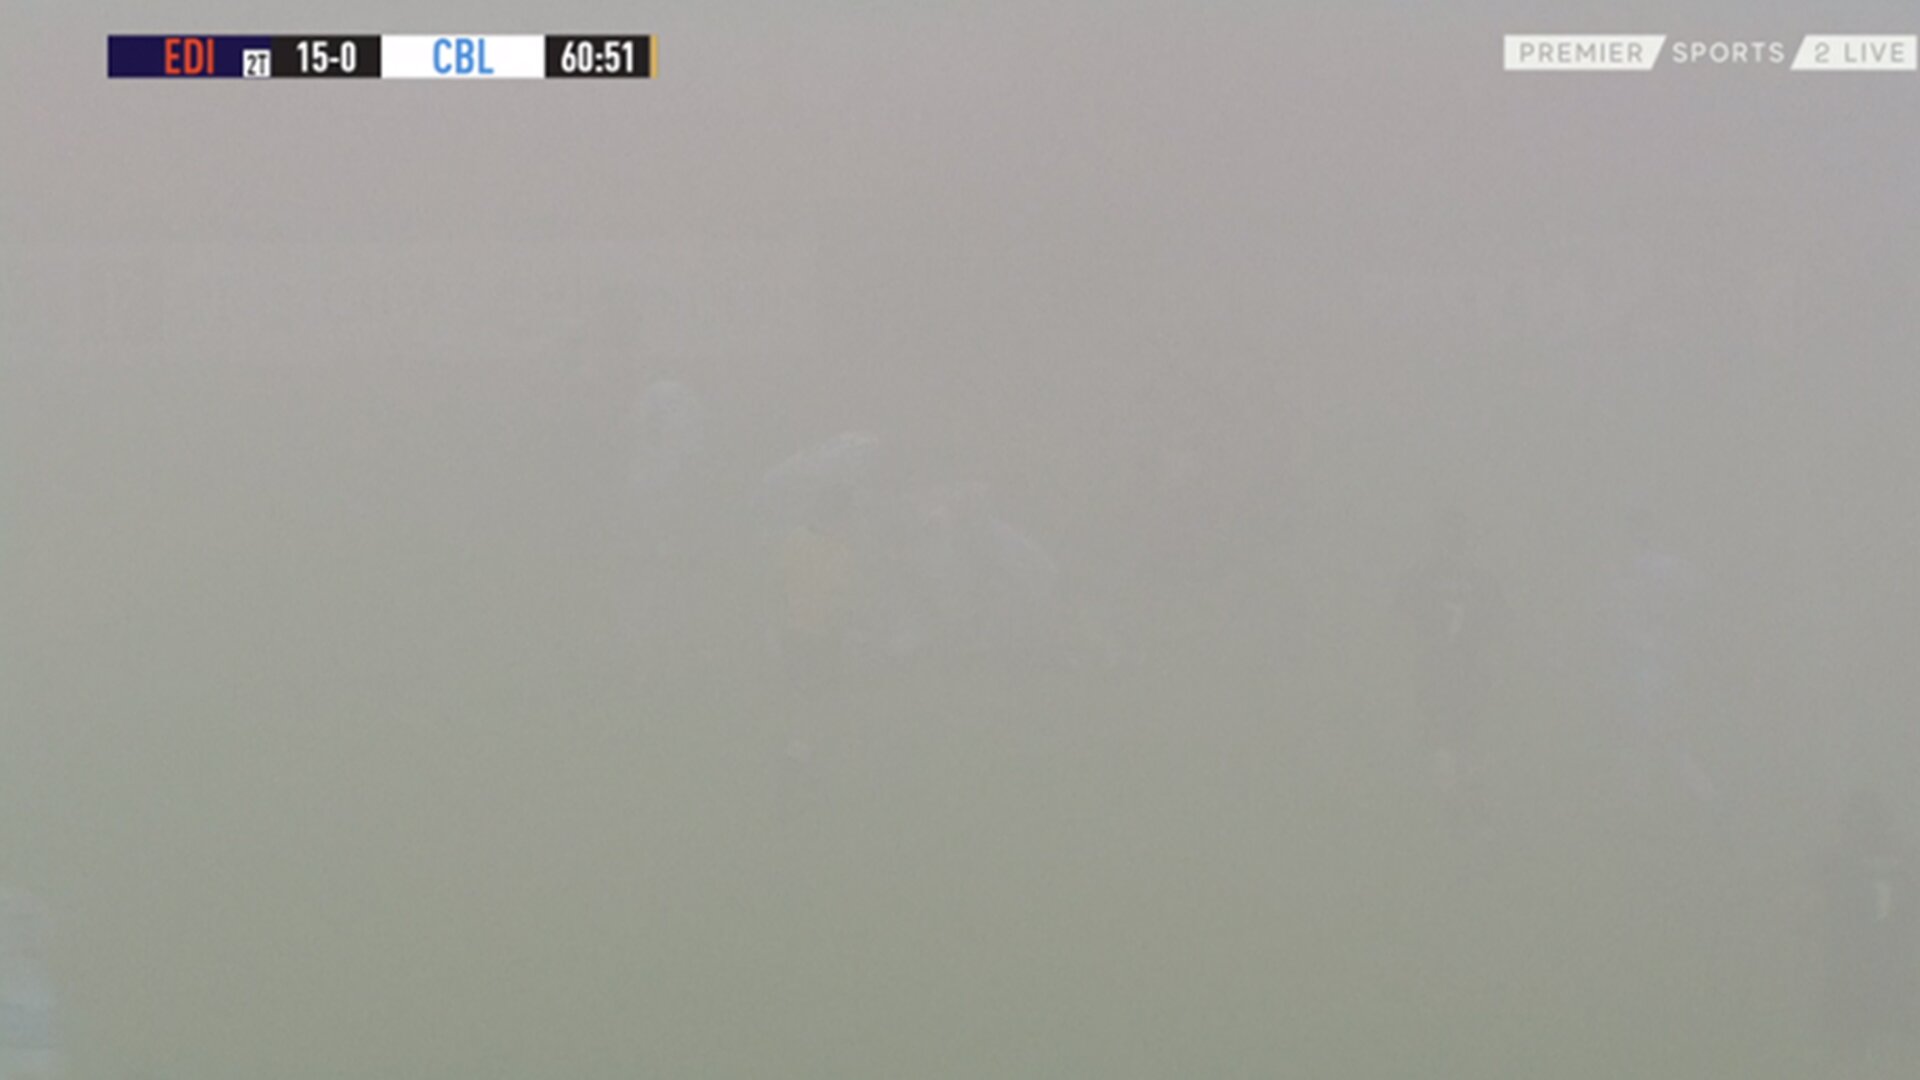 PRO 14 match between Edinburgh and Cardiff Blues branded 'unwatchable' as fog sets in